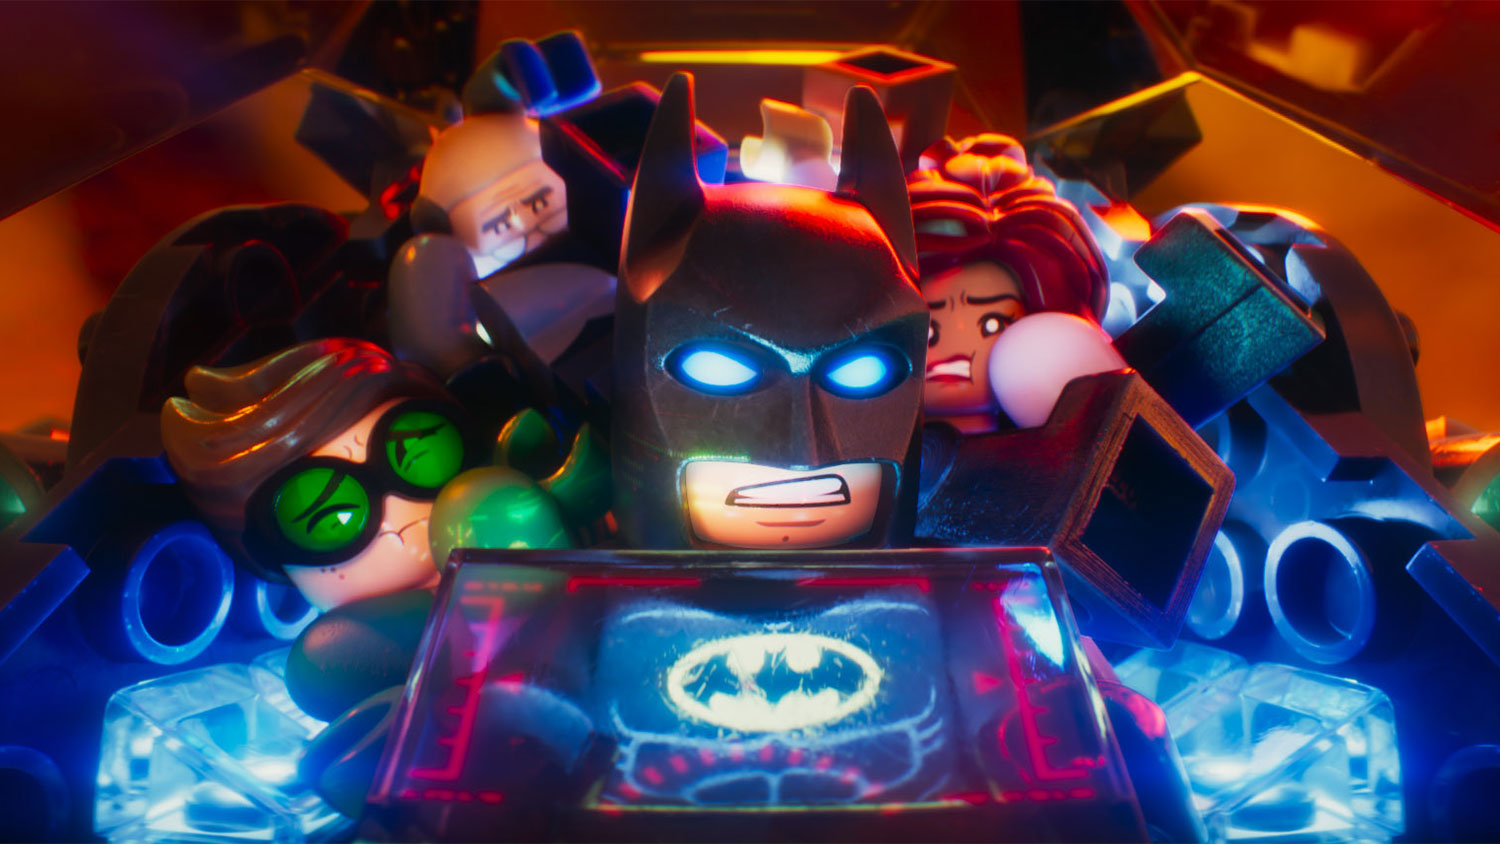 Box-Office Results: 'Lego Batman' Wins With $55.6M; 'Fifty Shades